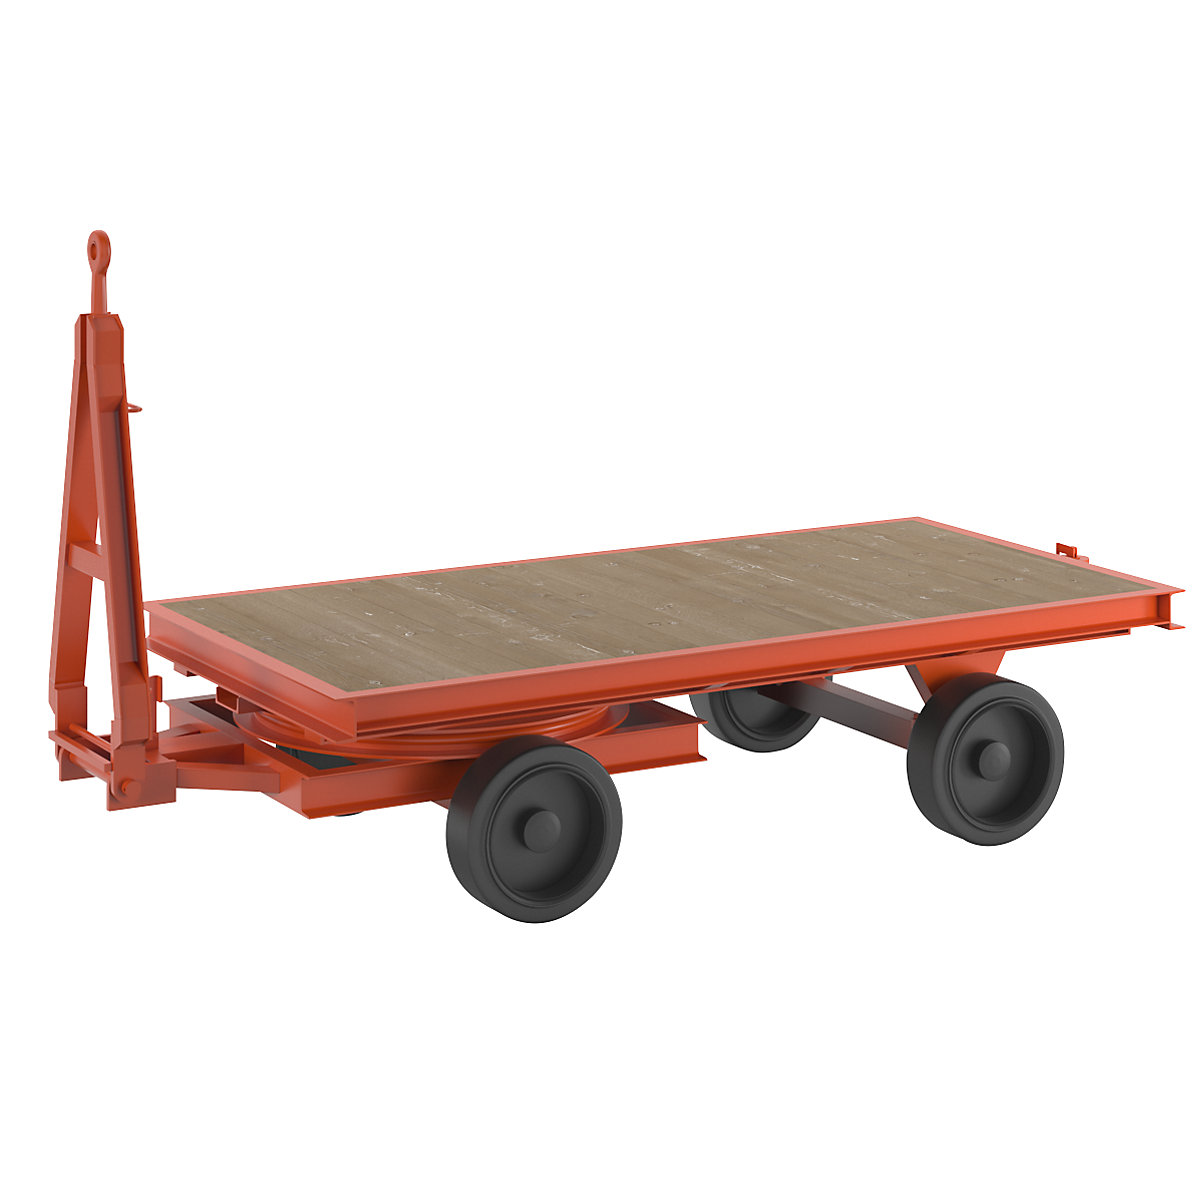 Trailer, 2-wheel turntable steering, max. load 8 t, platform 2.5 x 1.25 m, solid rubber tyres-2